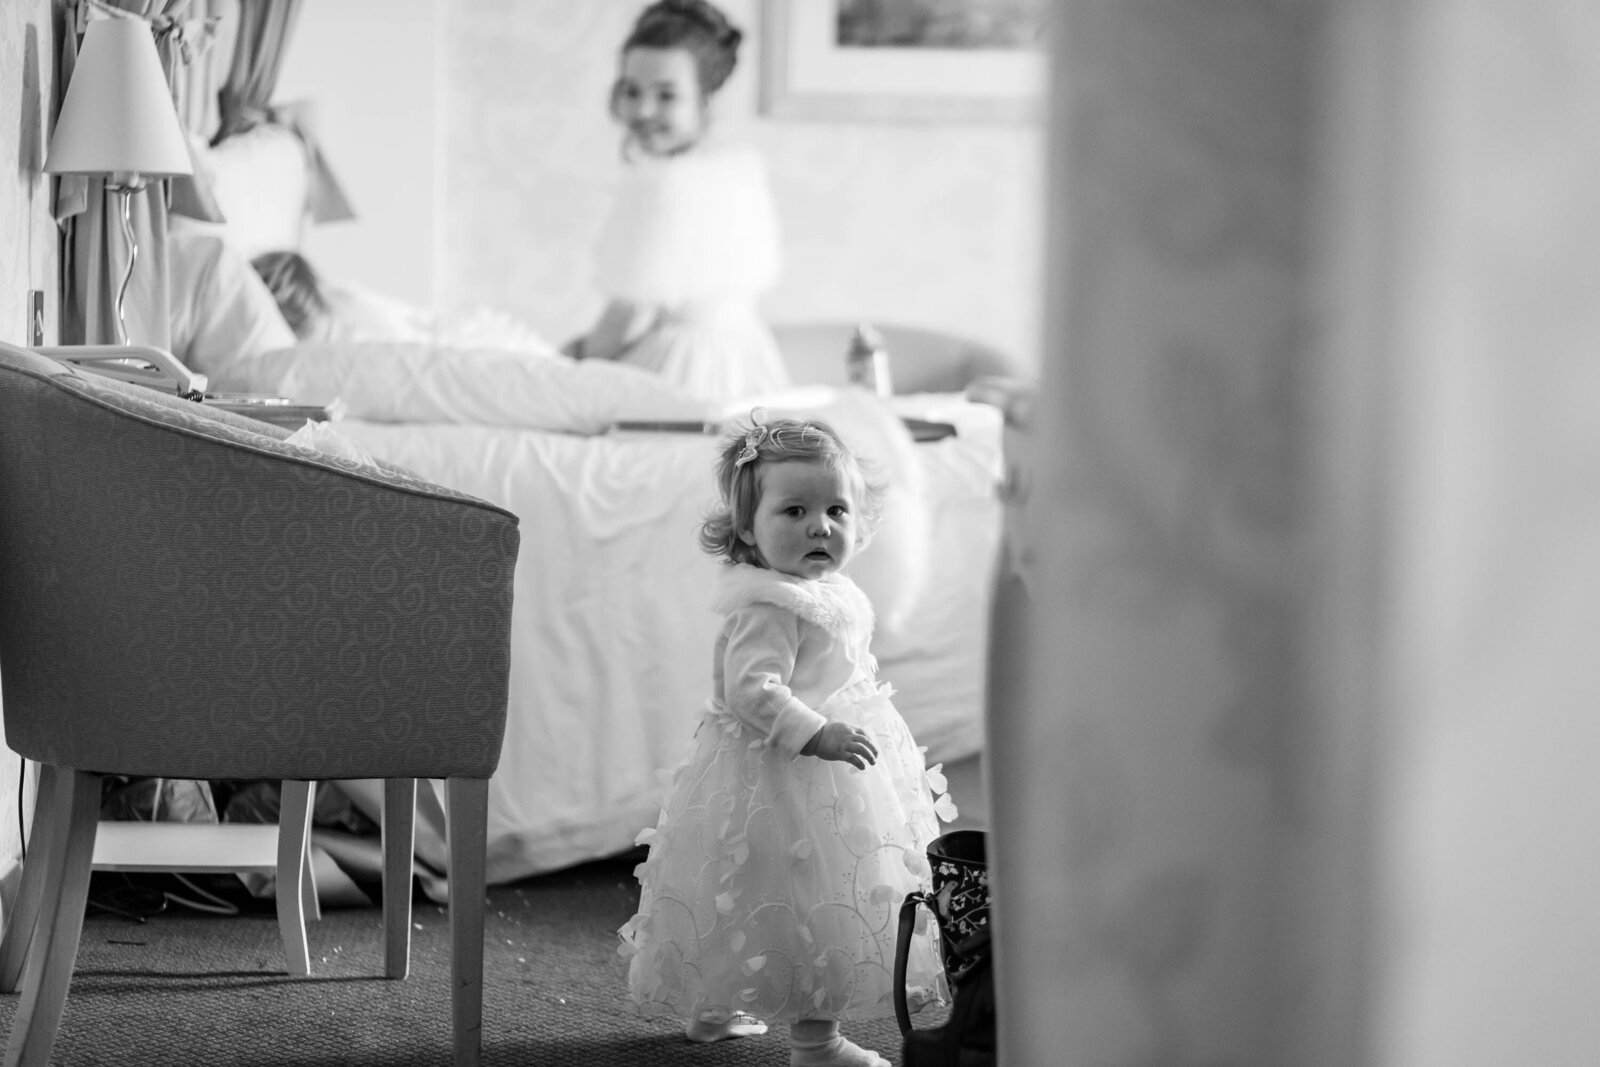 Child bridesmaid at a wedding in Coventry